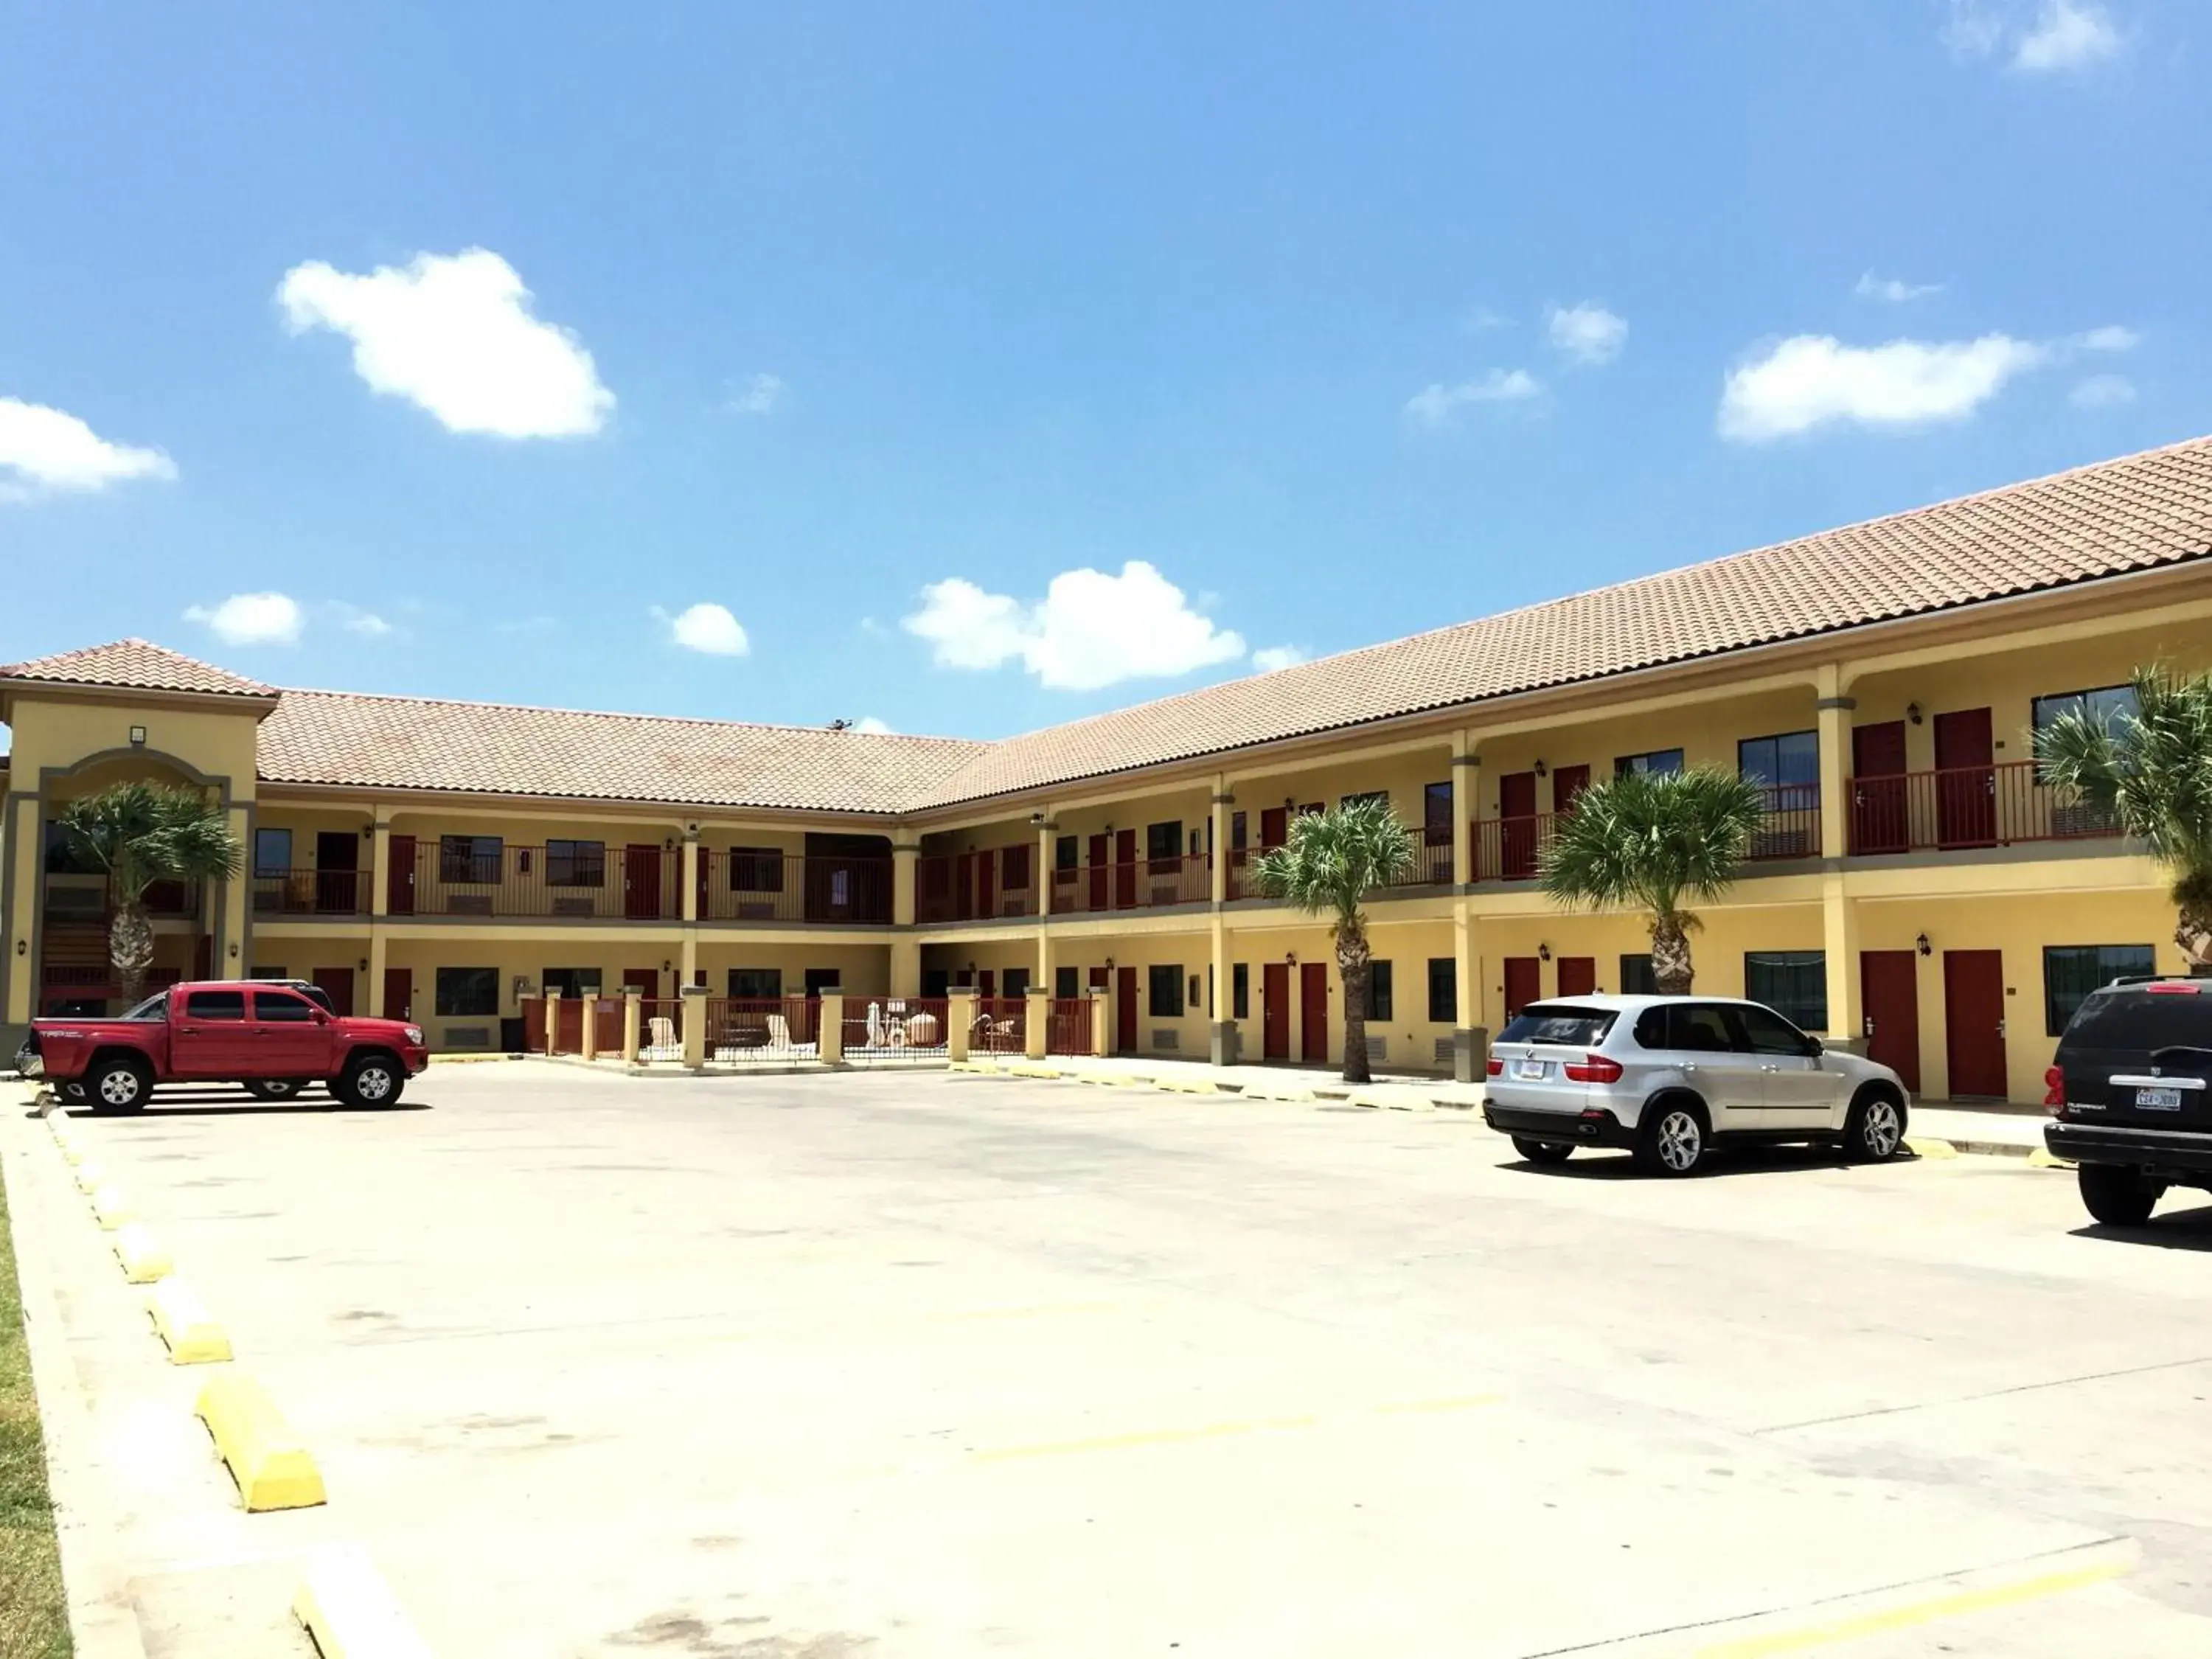 Property Building in Boca Chica Inn and Suites